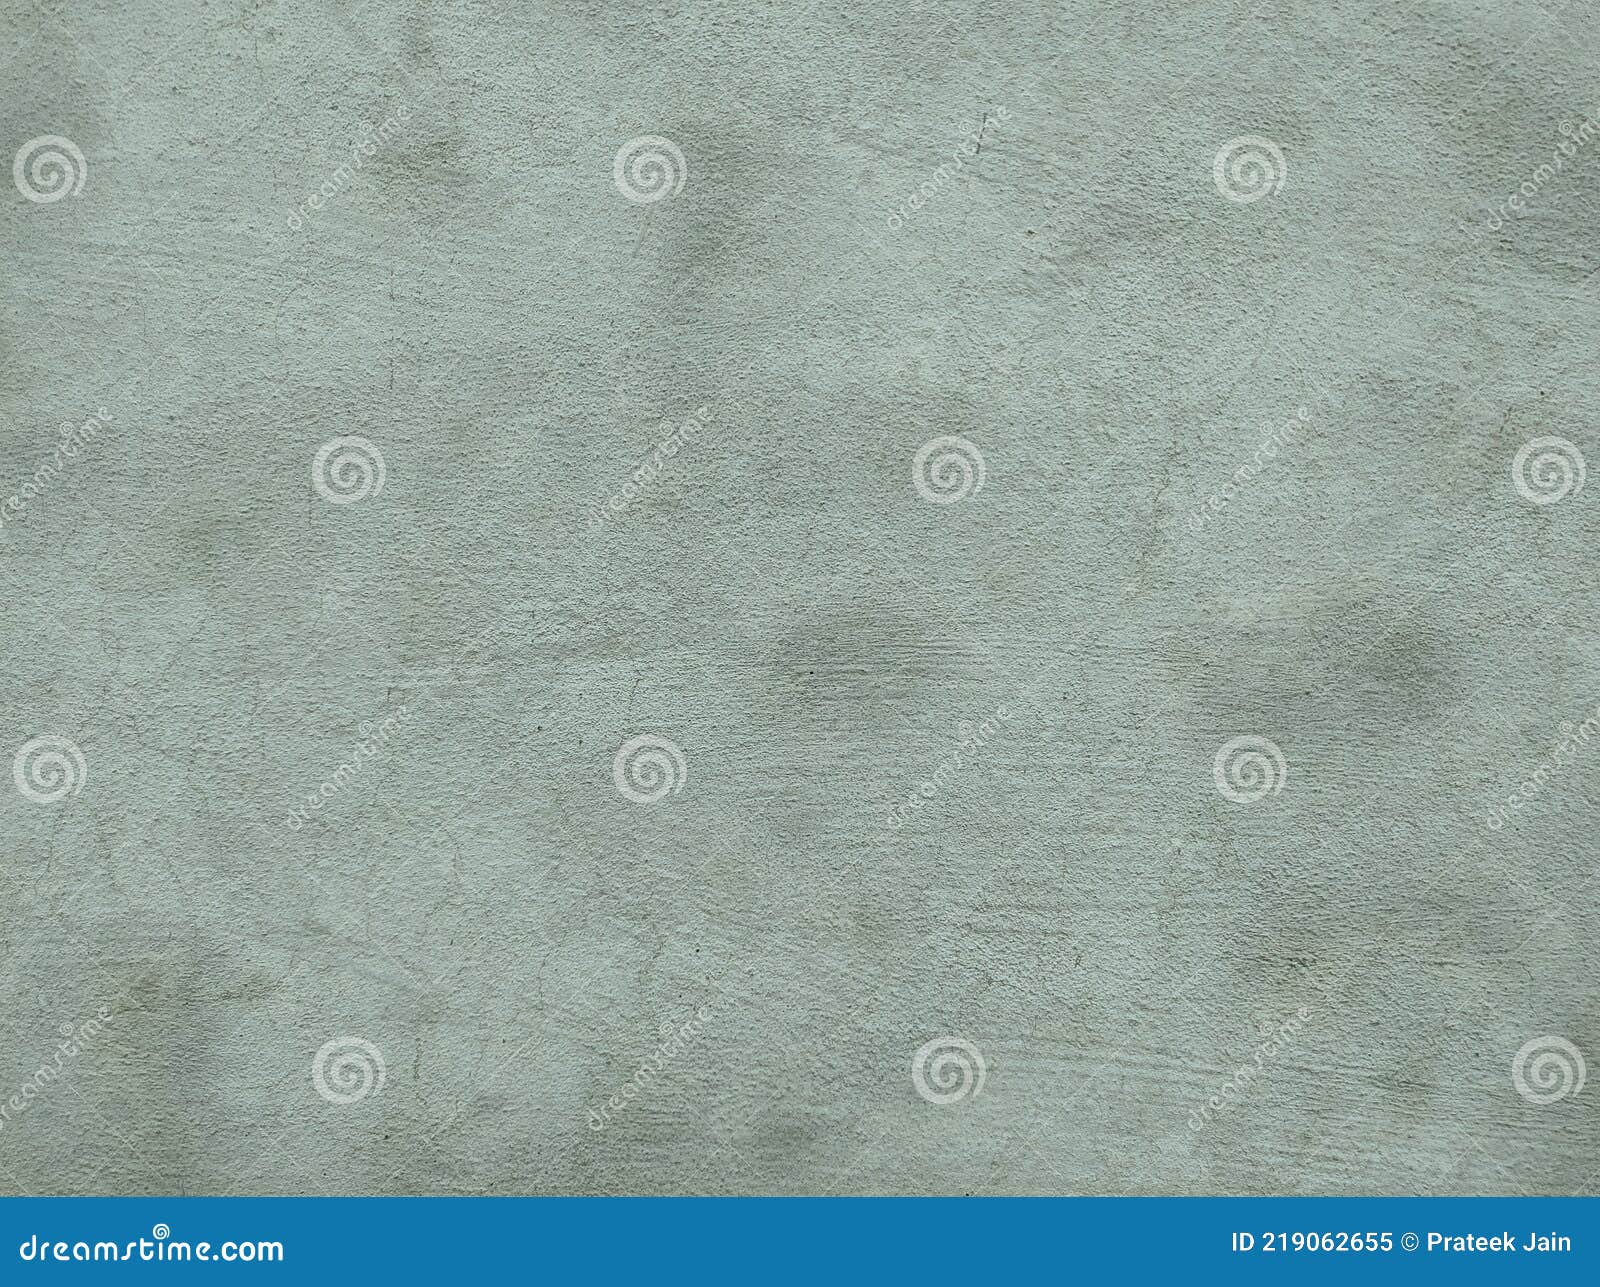 Abstract Weathered Dark Concrete Wall Texture.Concrete Wall Background ...